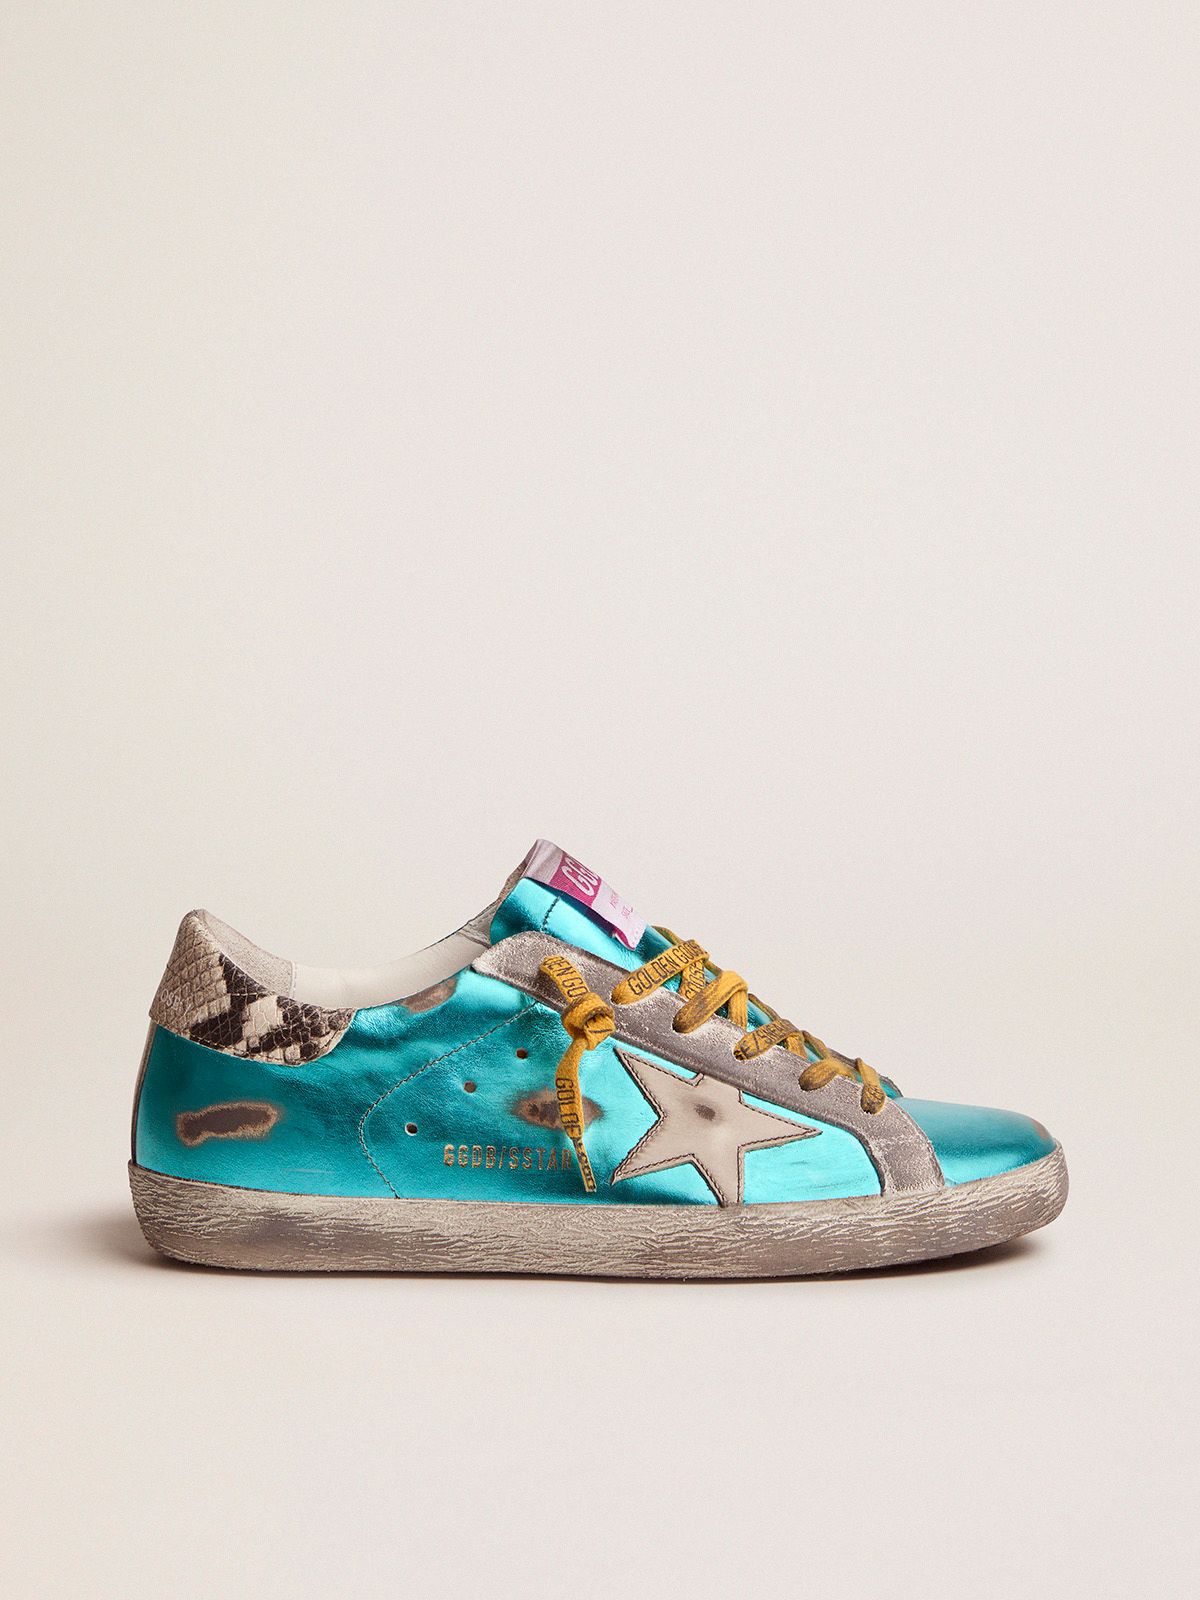 Sneakers Uomo Golden Goose Turquoise green laminated Super-Star LTD sneakers with snake-print heel tab